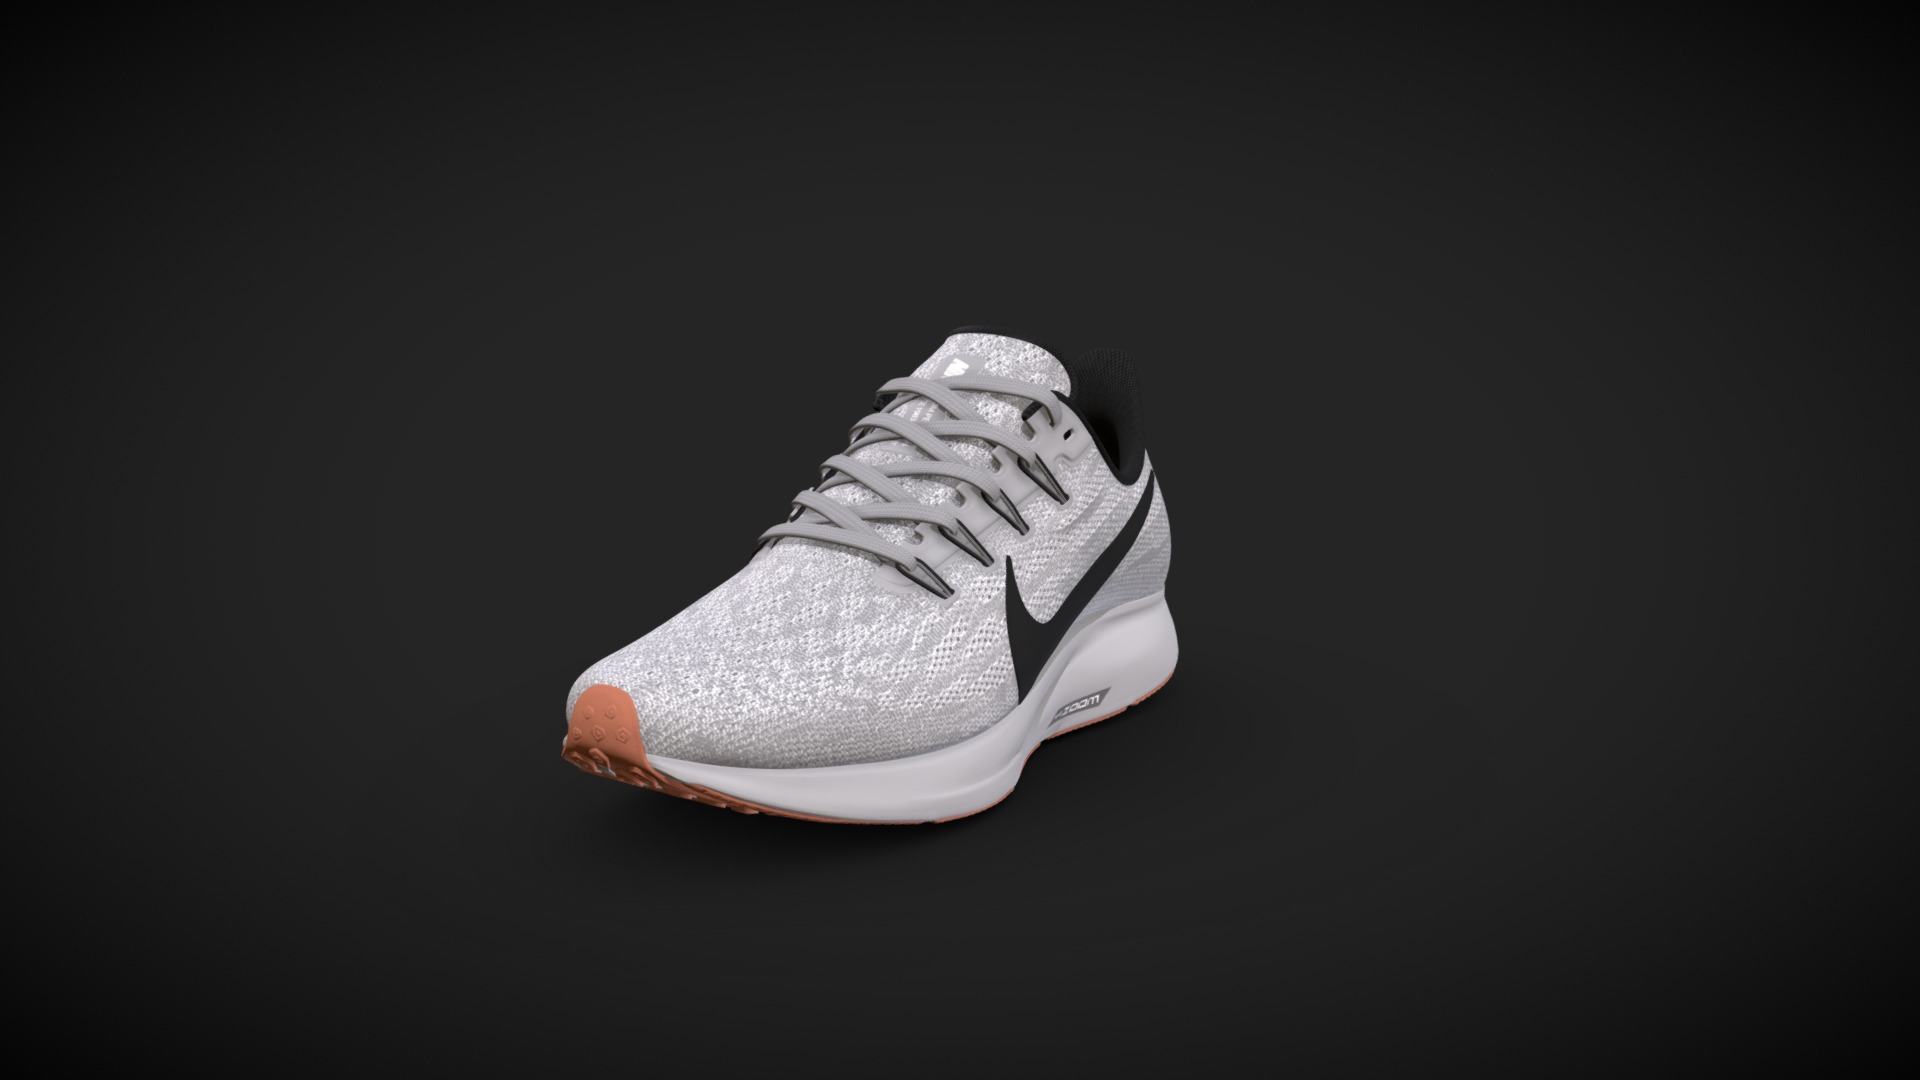 3D model Nike Shoe - This is a 3D model of the Nike Shoe. The 3D model is about a white and grey shoe.